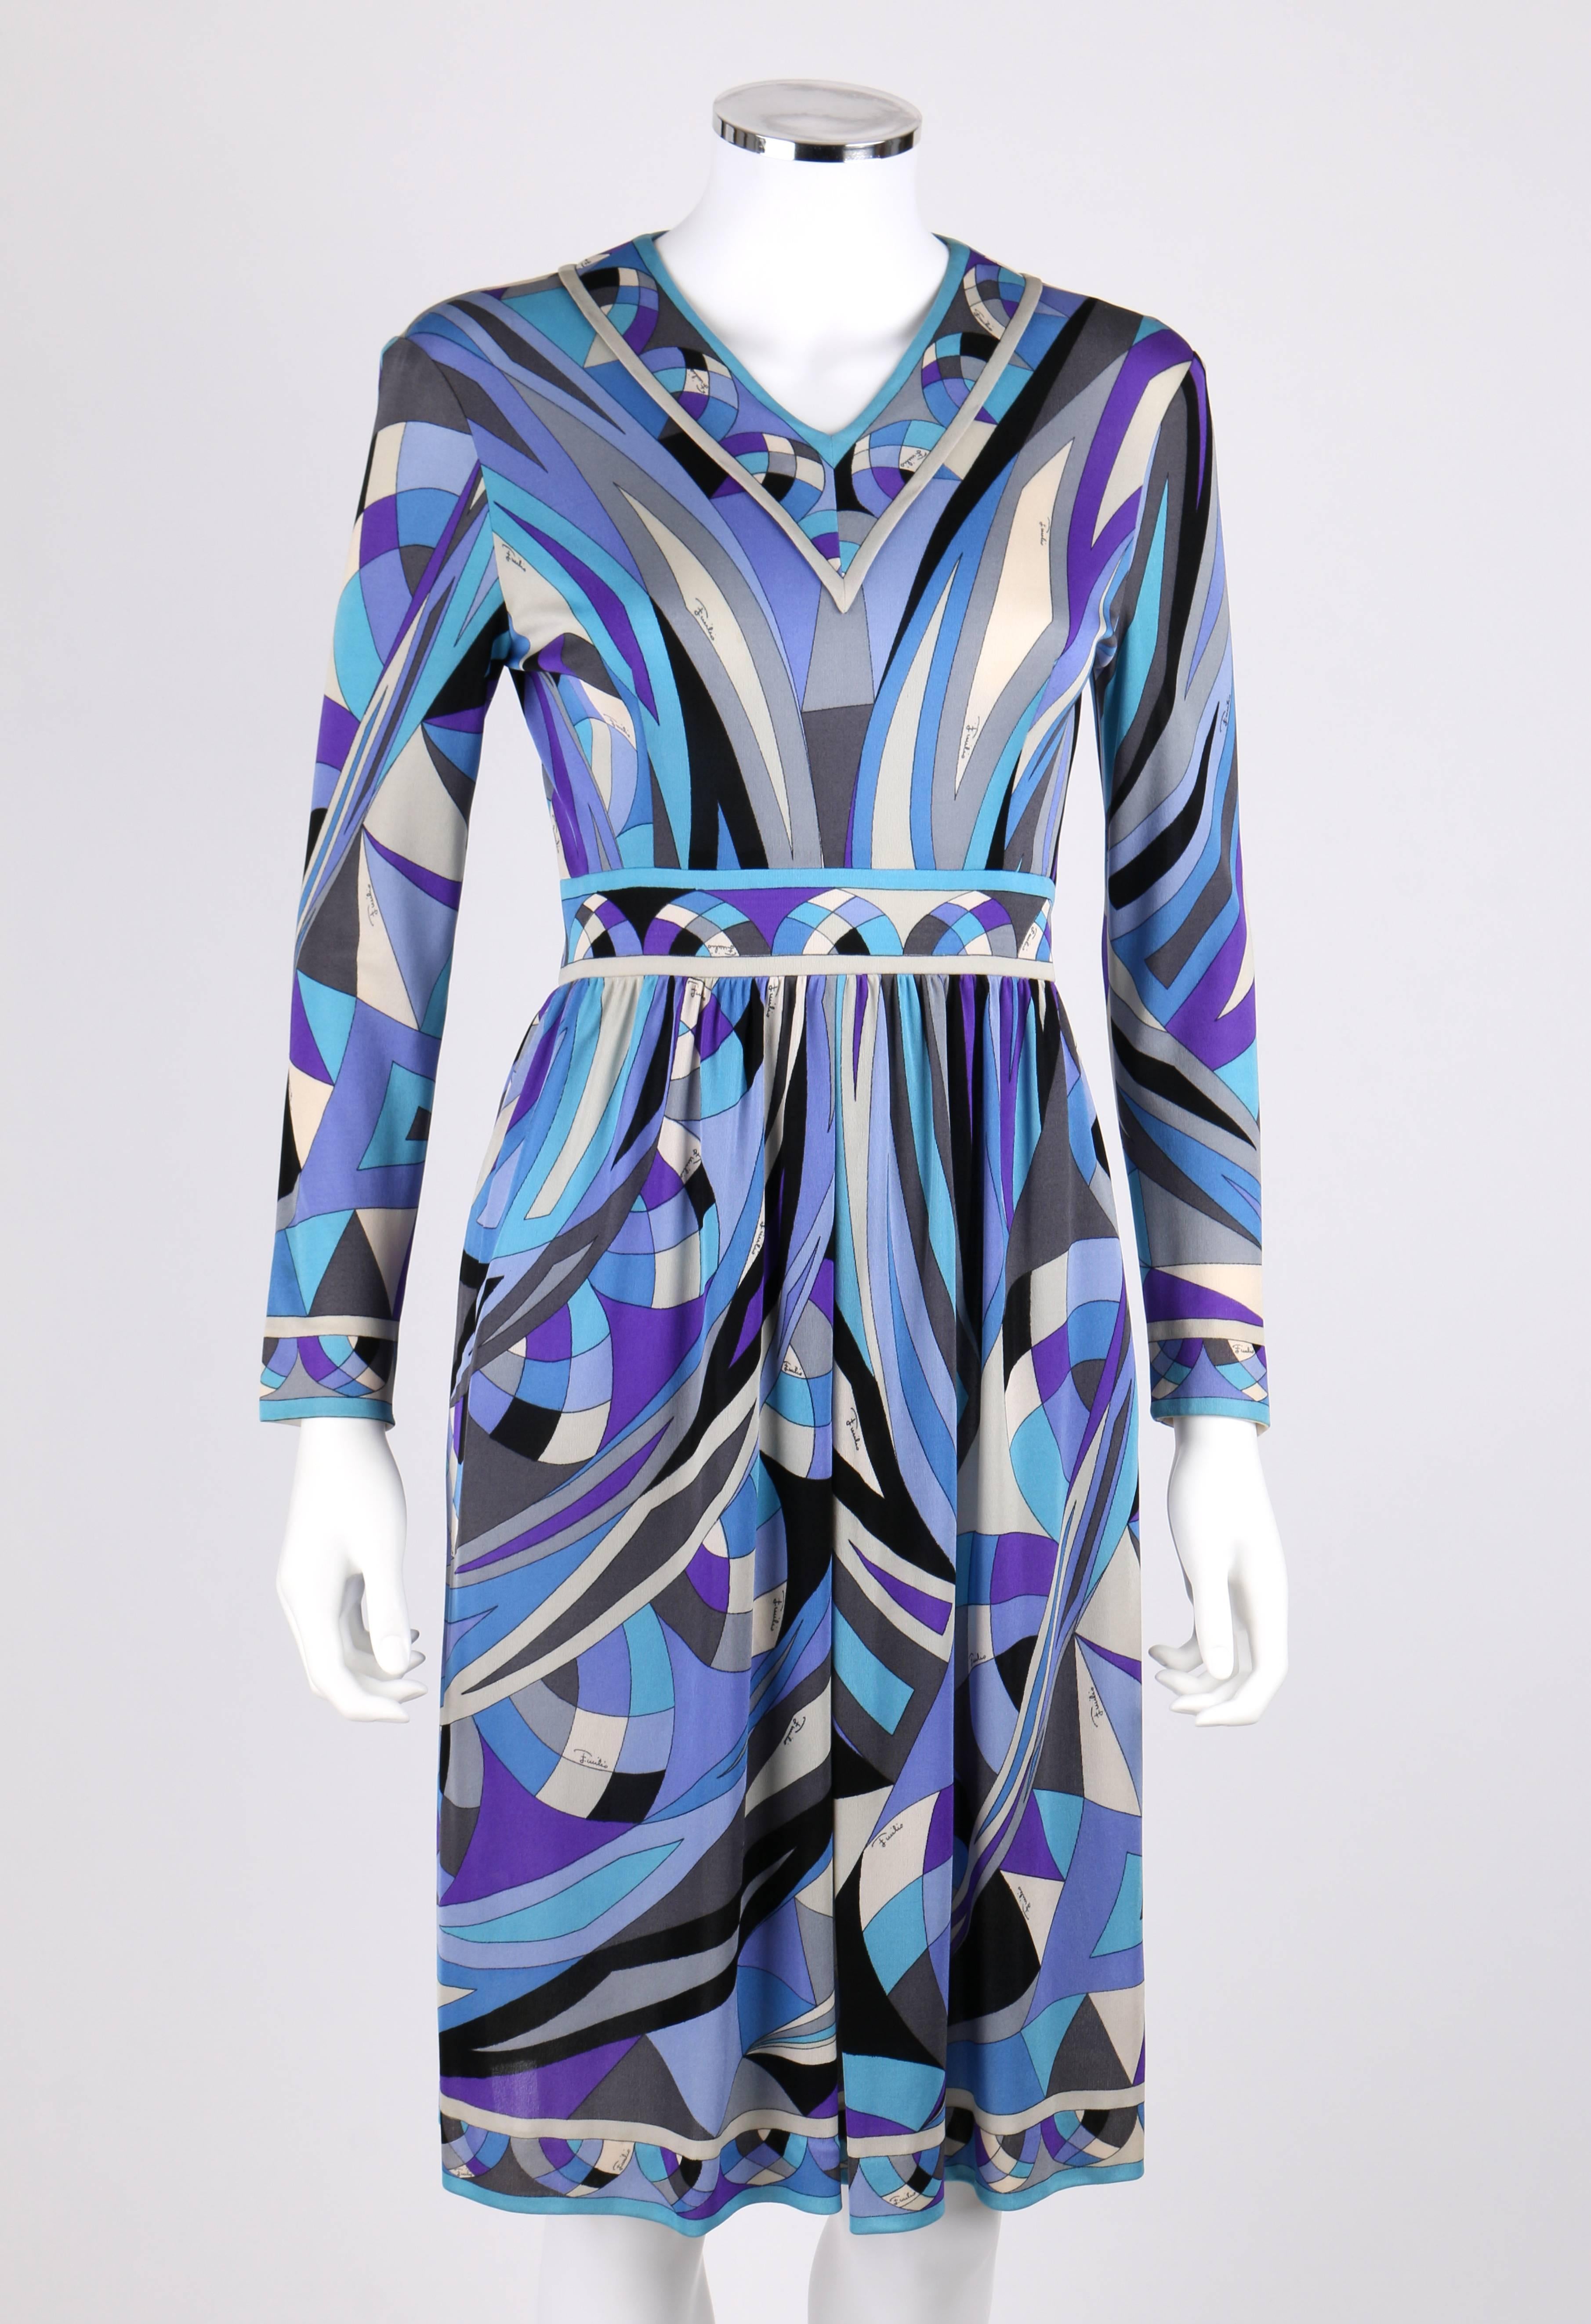 Vintage c.1960's Emilio Pucci signature print in shades of blue, gray, and cream silk jersey dress. Long sleeves. V-neckline. Yoked waist. Gathered skirt with center pleat detail. Decorative border at collar, waist, hemline, cuffs, and zipper.